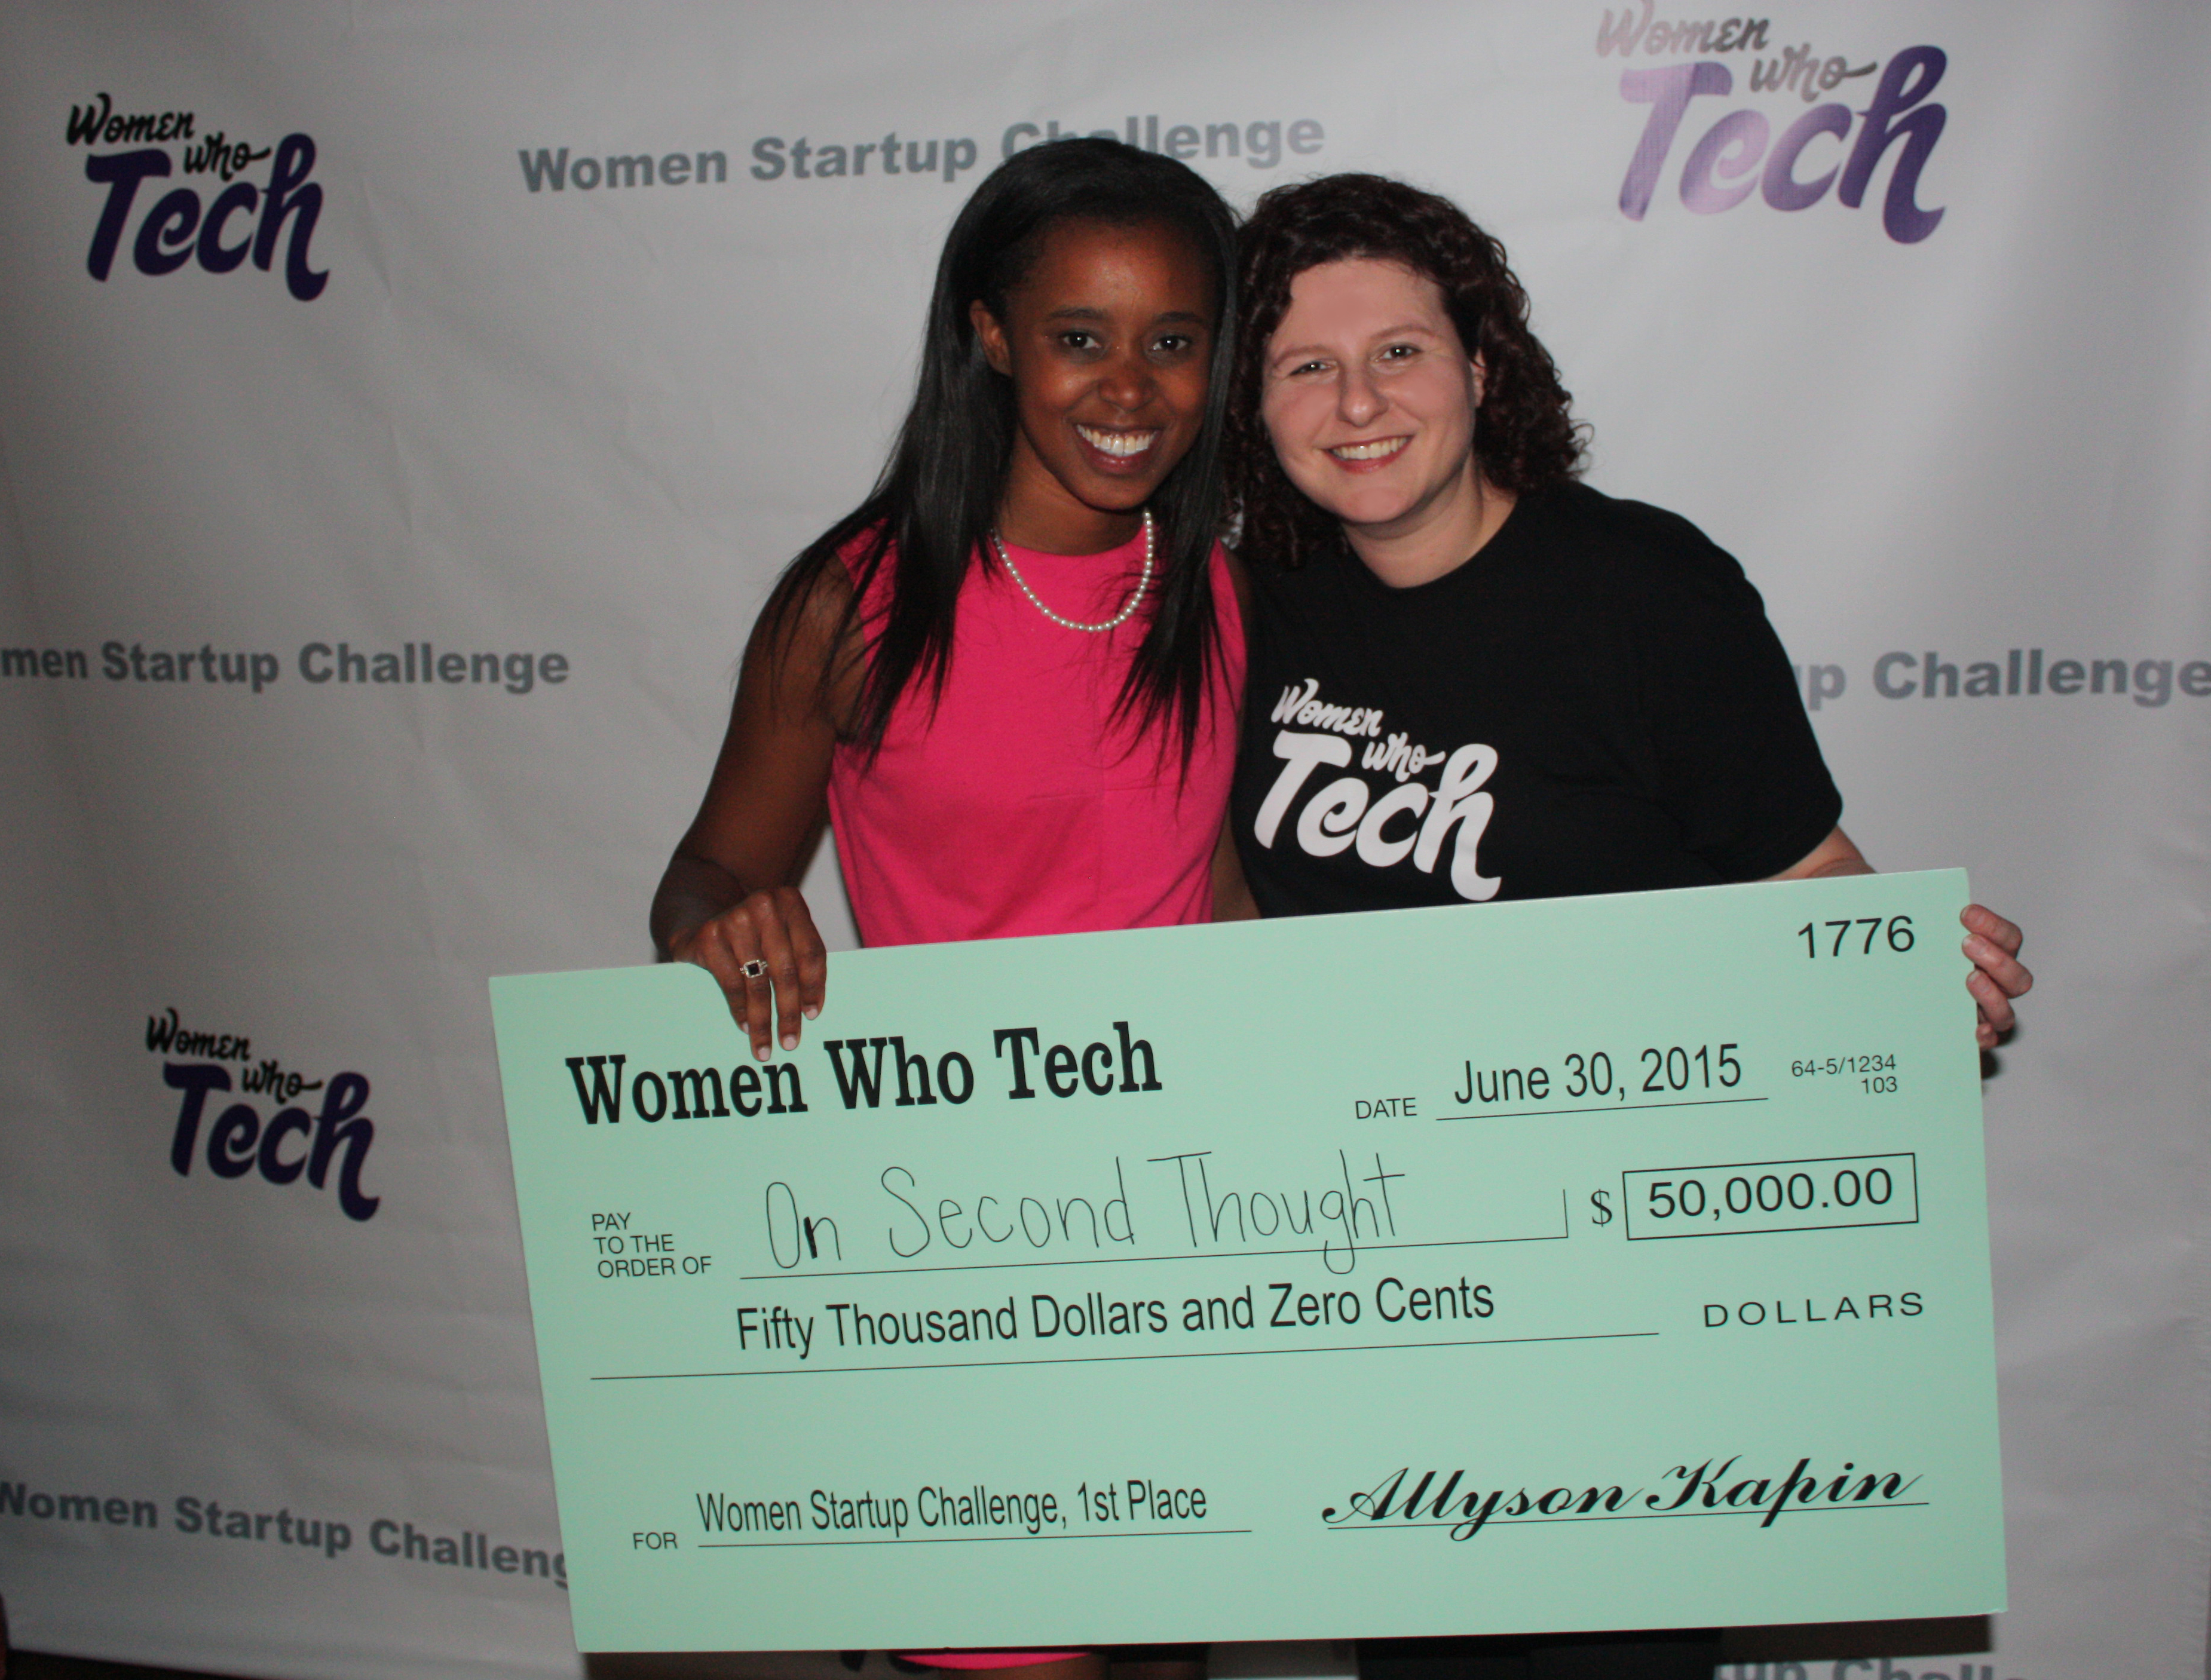 Maci Peterson of On Second Thought and Women Who Tech's Allyson Kapin